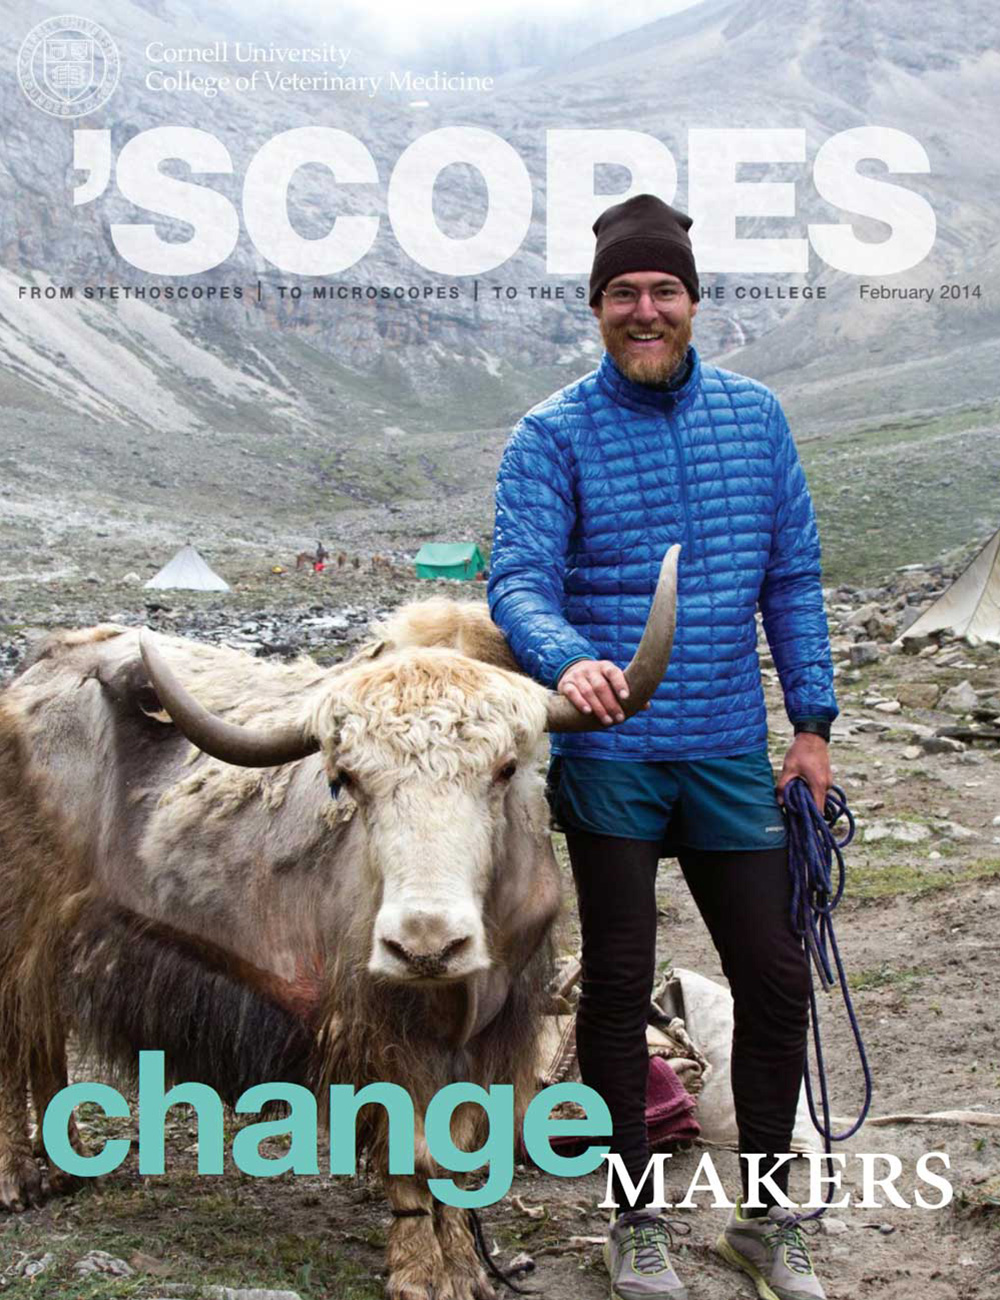 'Scopes February 2014 cover featuring a man with a yak